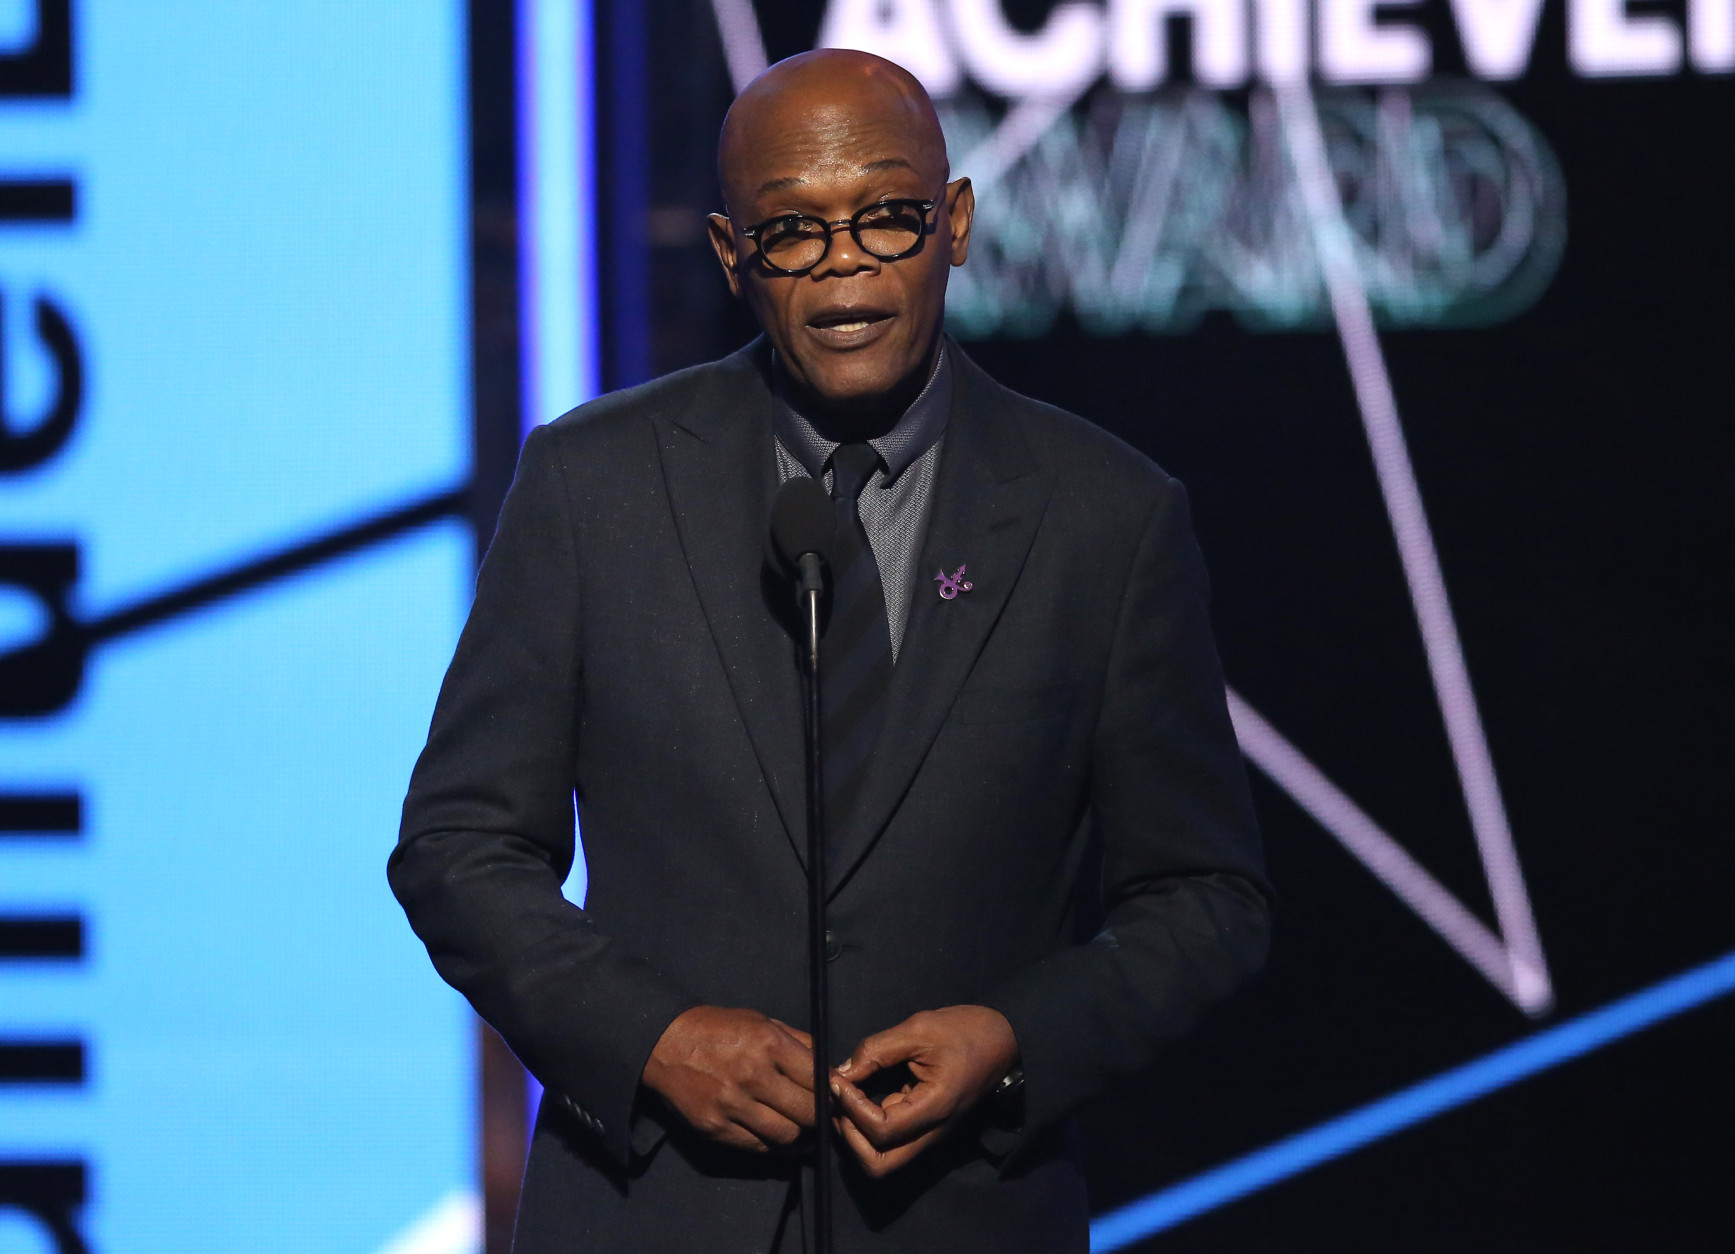 Samuel L. Jackson accepts the lifetime achievement award at the BET Awards at the Microsoft Theater on Sunday, June 26, 2016, in Los Angeles. (Photo by Matt Sayles/Invision/AP)